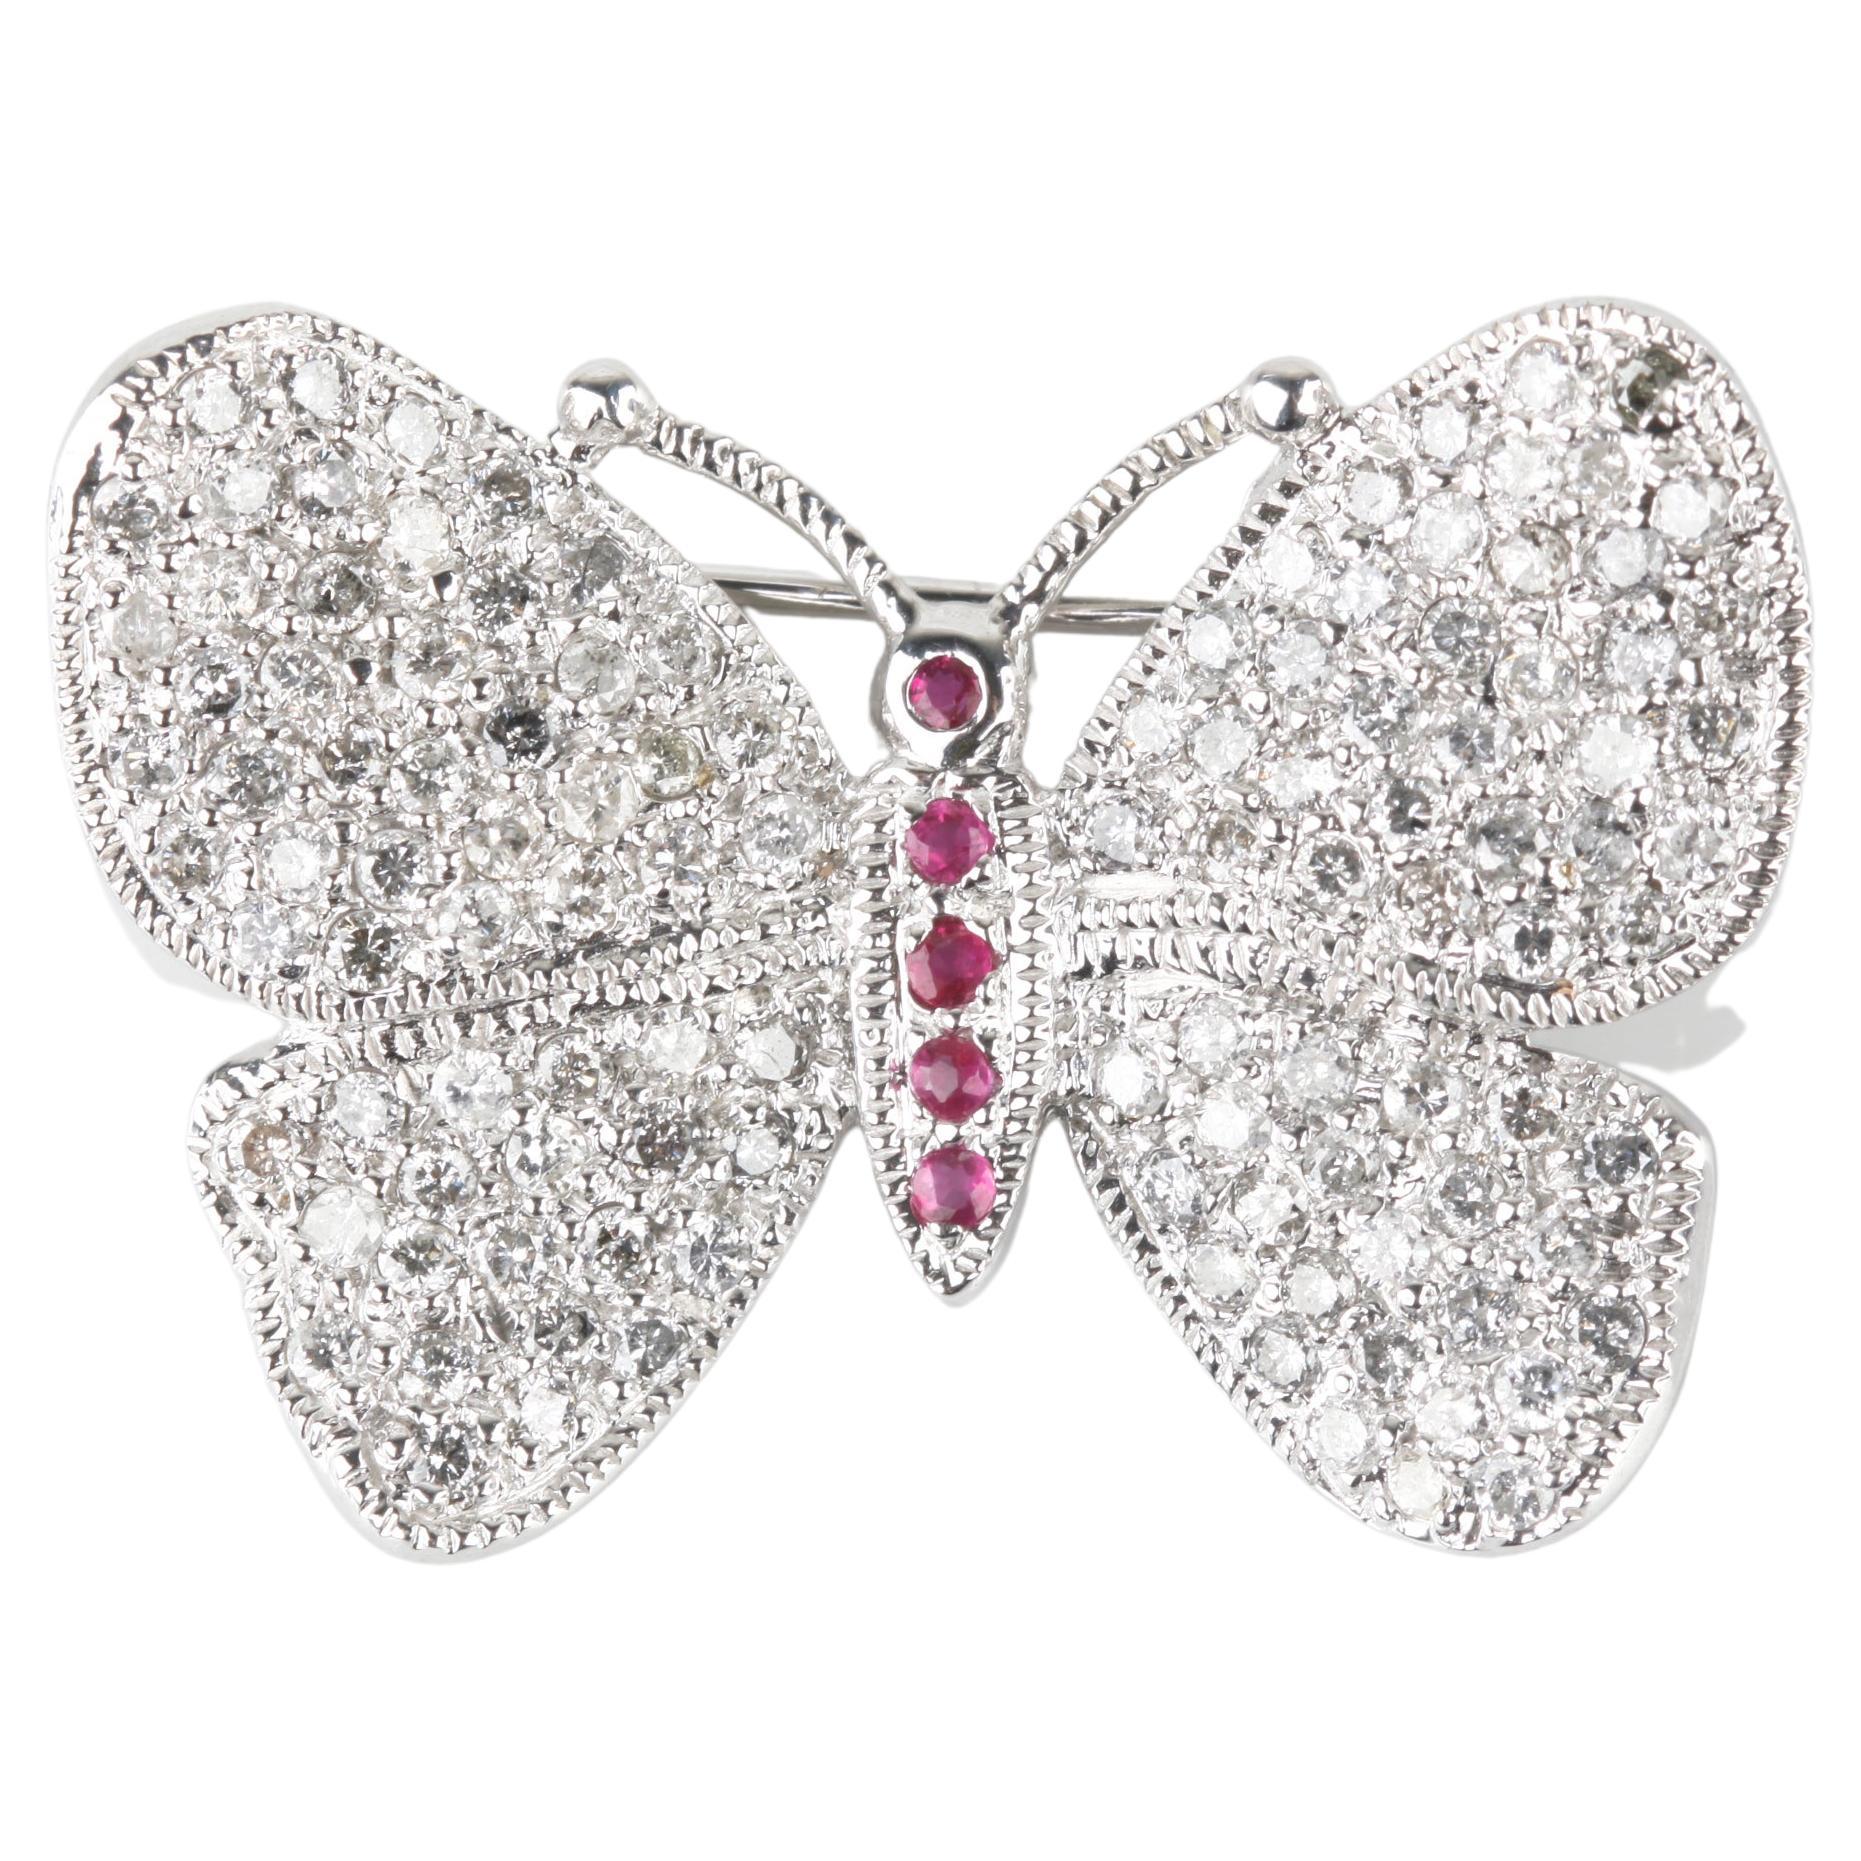 14k White Gold Butterfly Pave 1.87 Carat Diamond Brooch with Ruby Accents For Sale